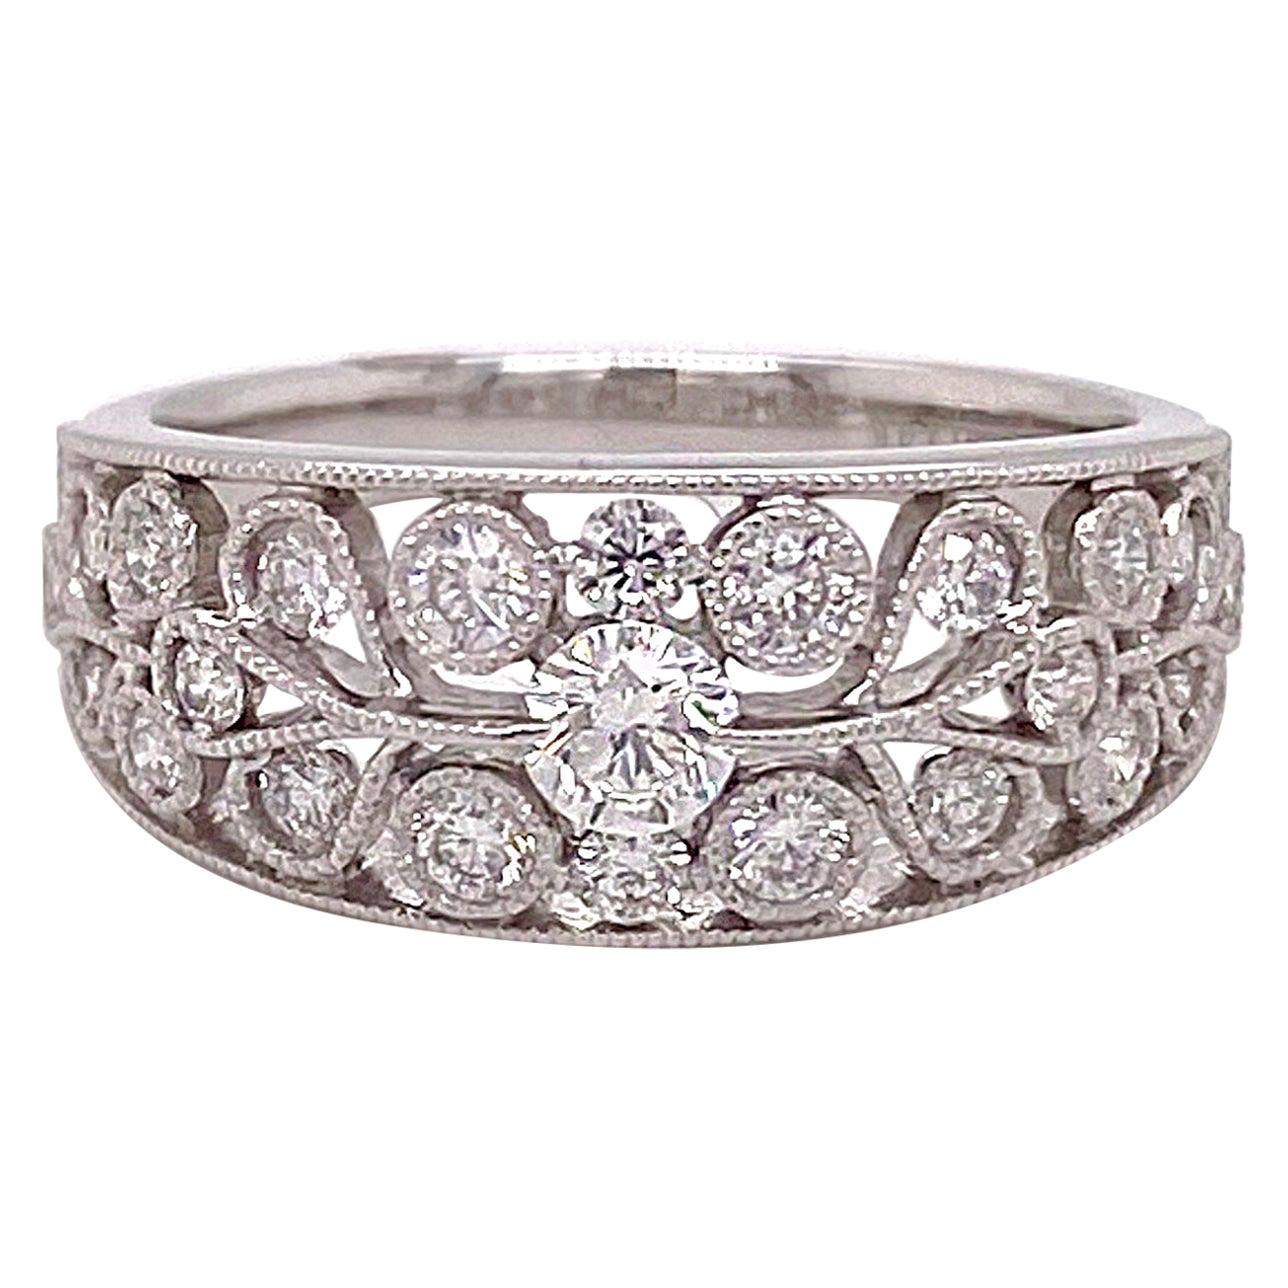 For Sale:  Tapered Wide Diamond Band, White Gold with 23 Diamonds .59 Carat Low Profile